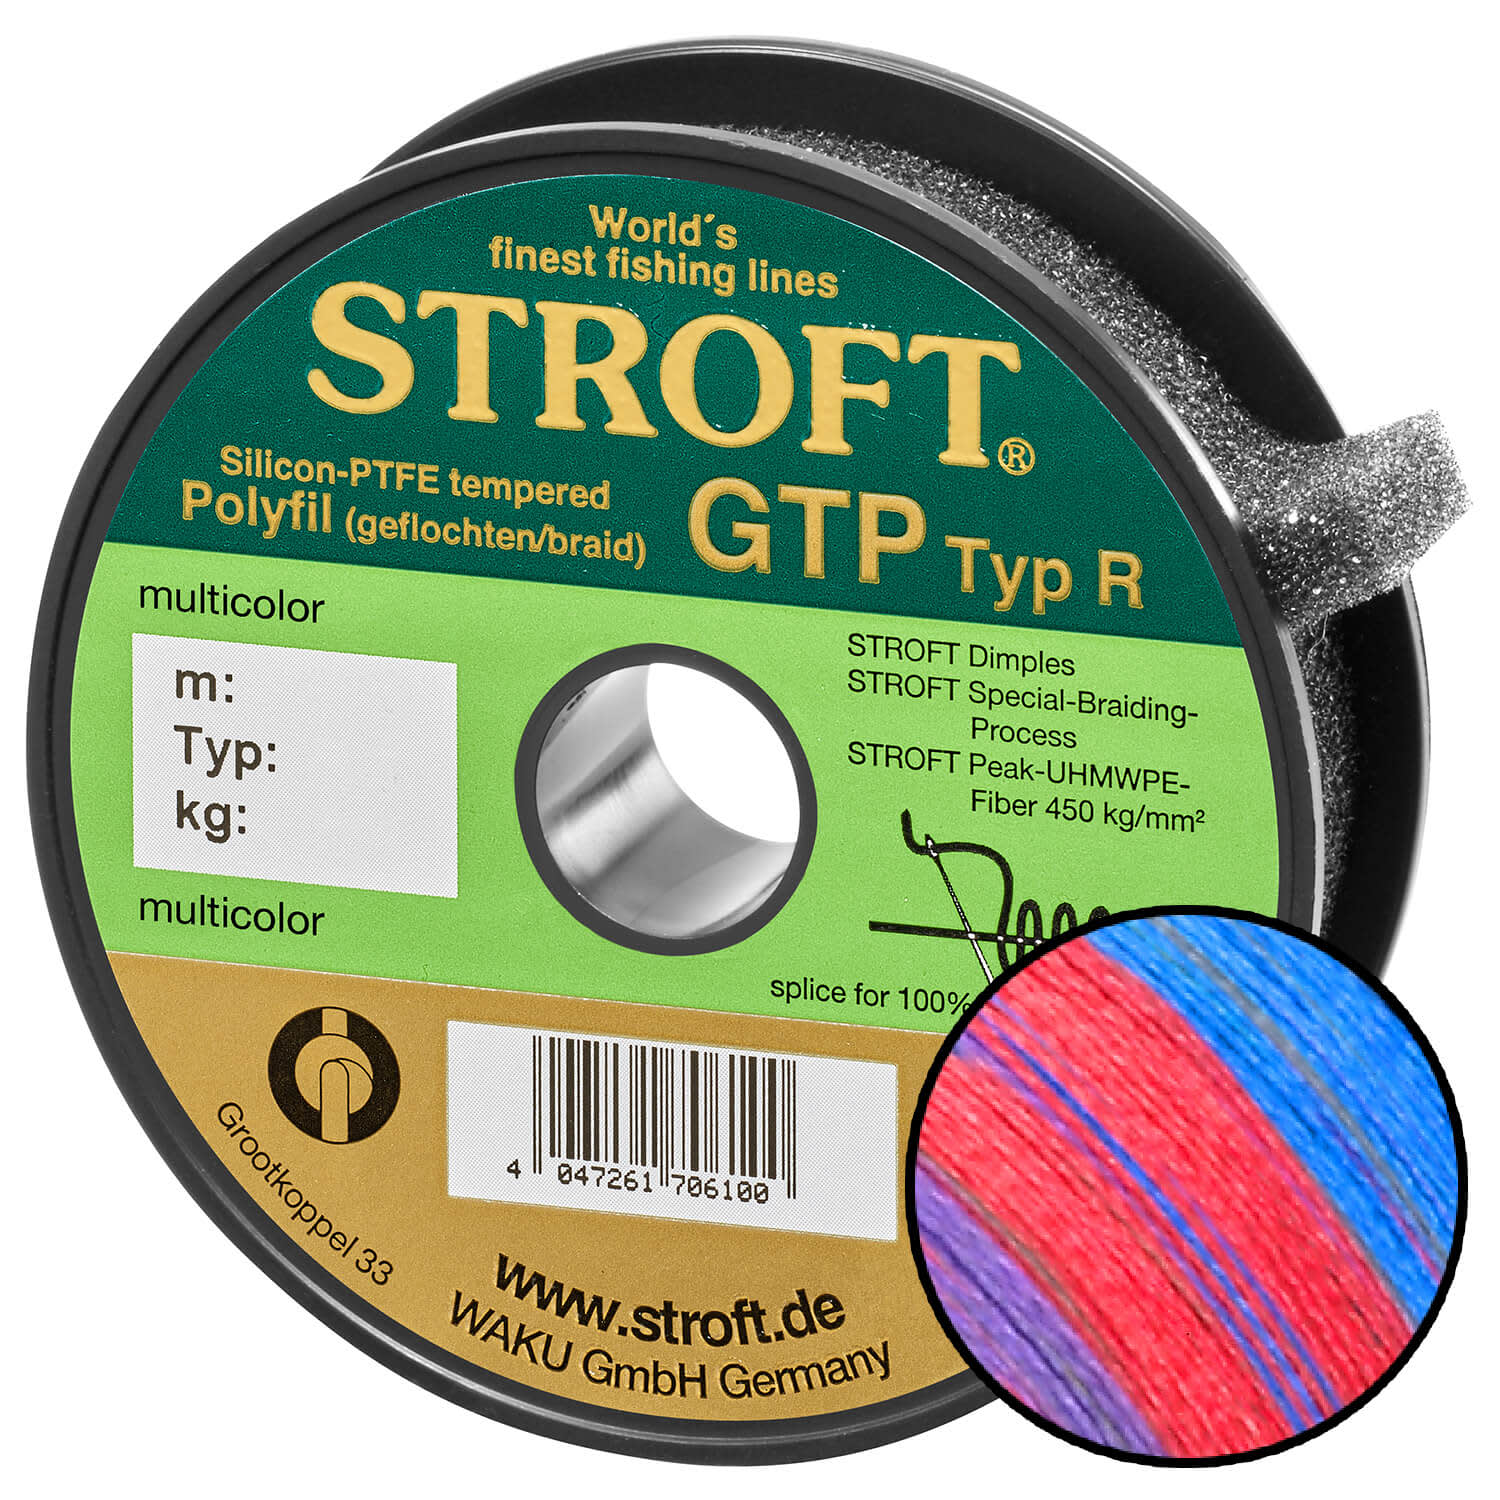 STROFT GTP Type R Braided Fishing Line 200m multicolour buy by